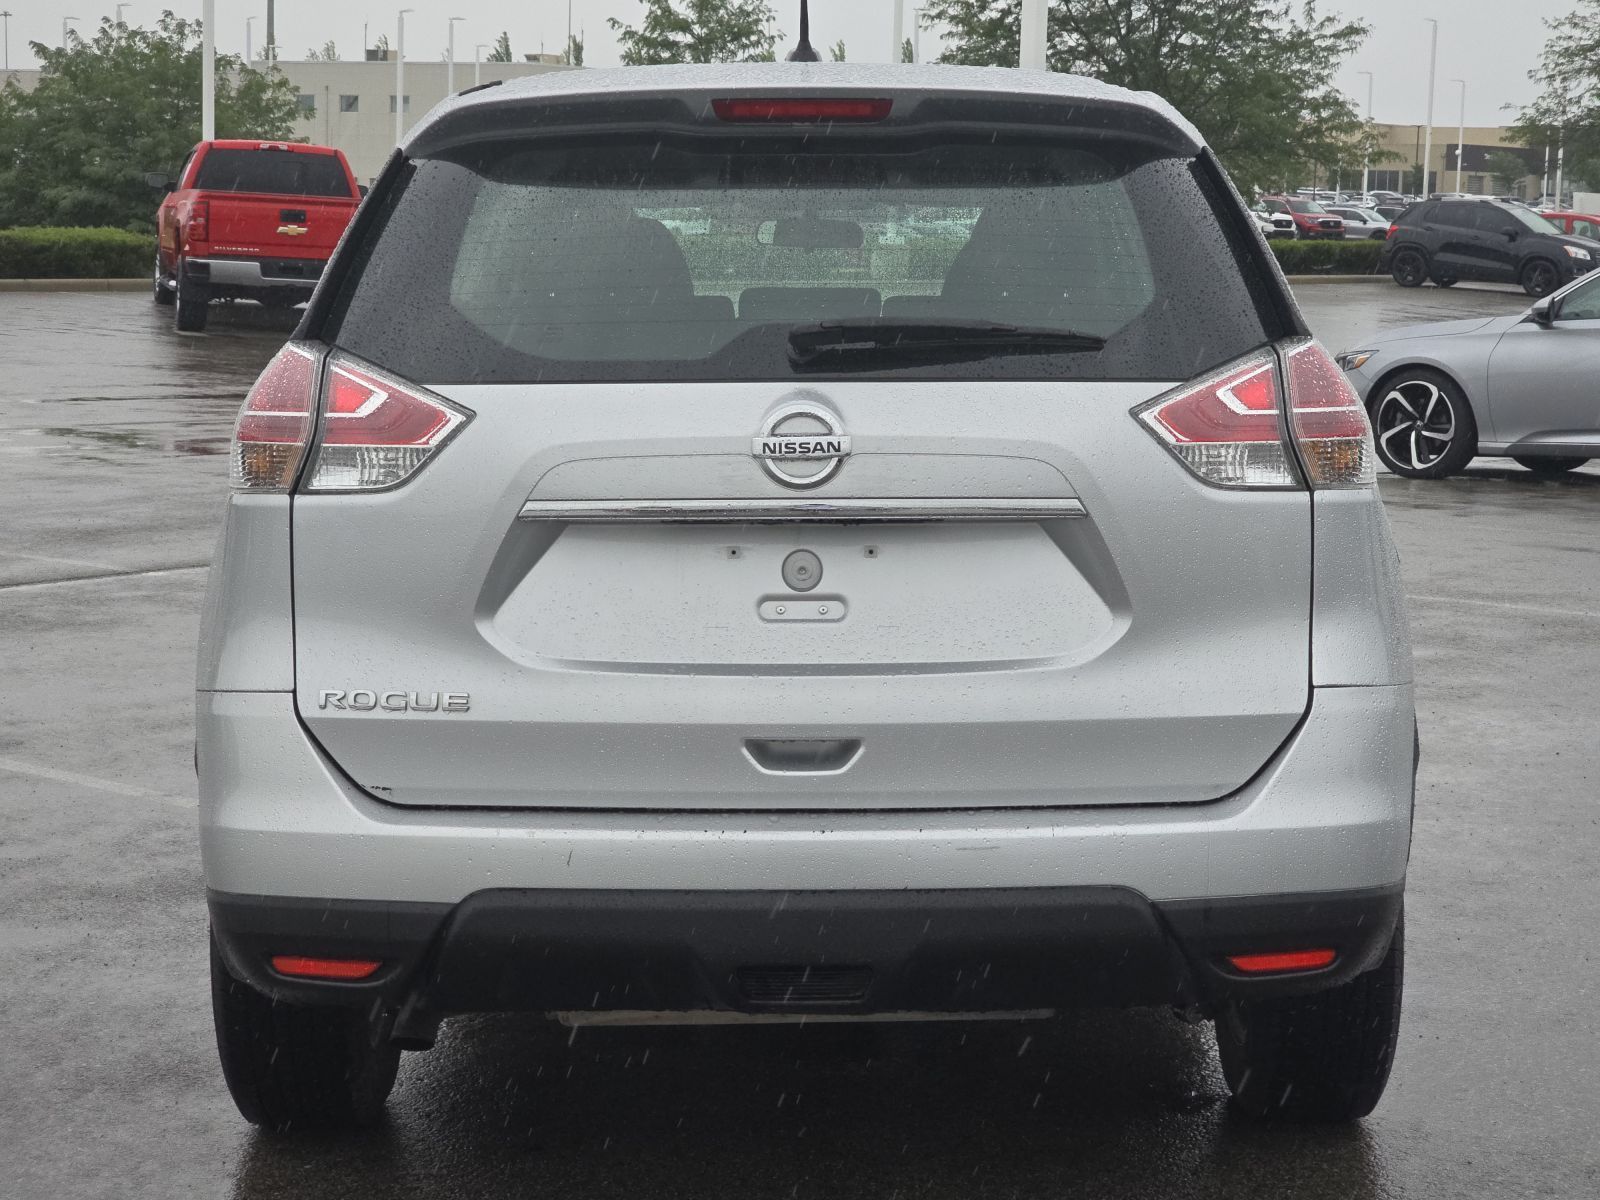 Used, 2016 Nissan Rogue S, Silver, G0428B-14